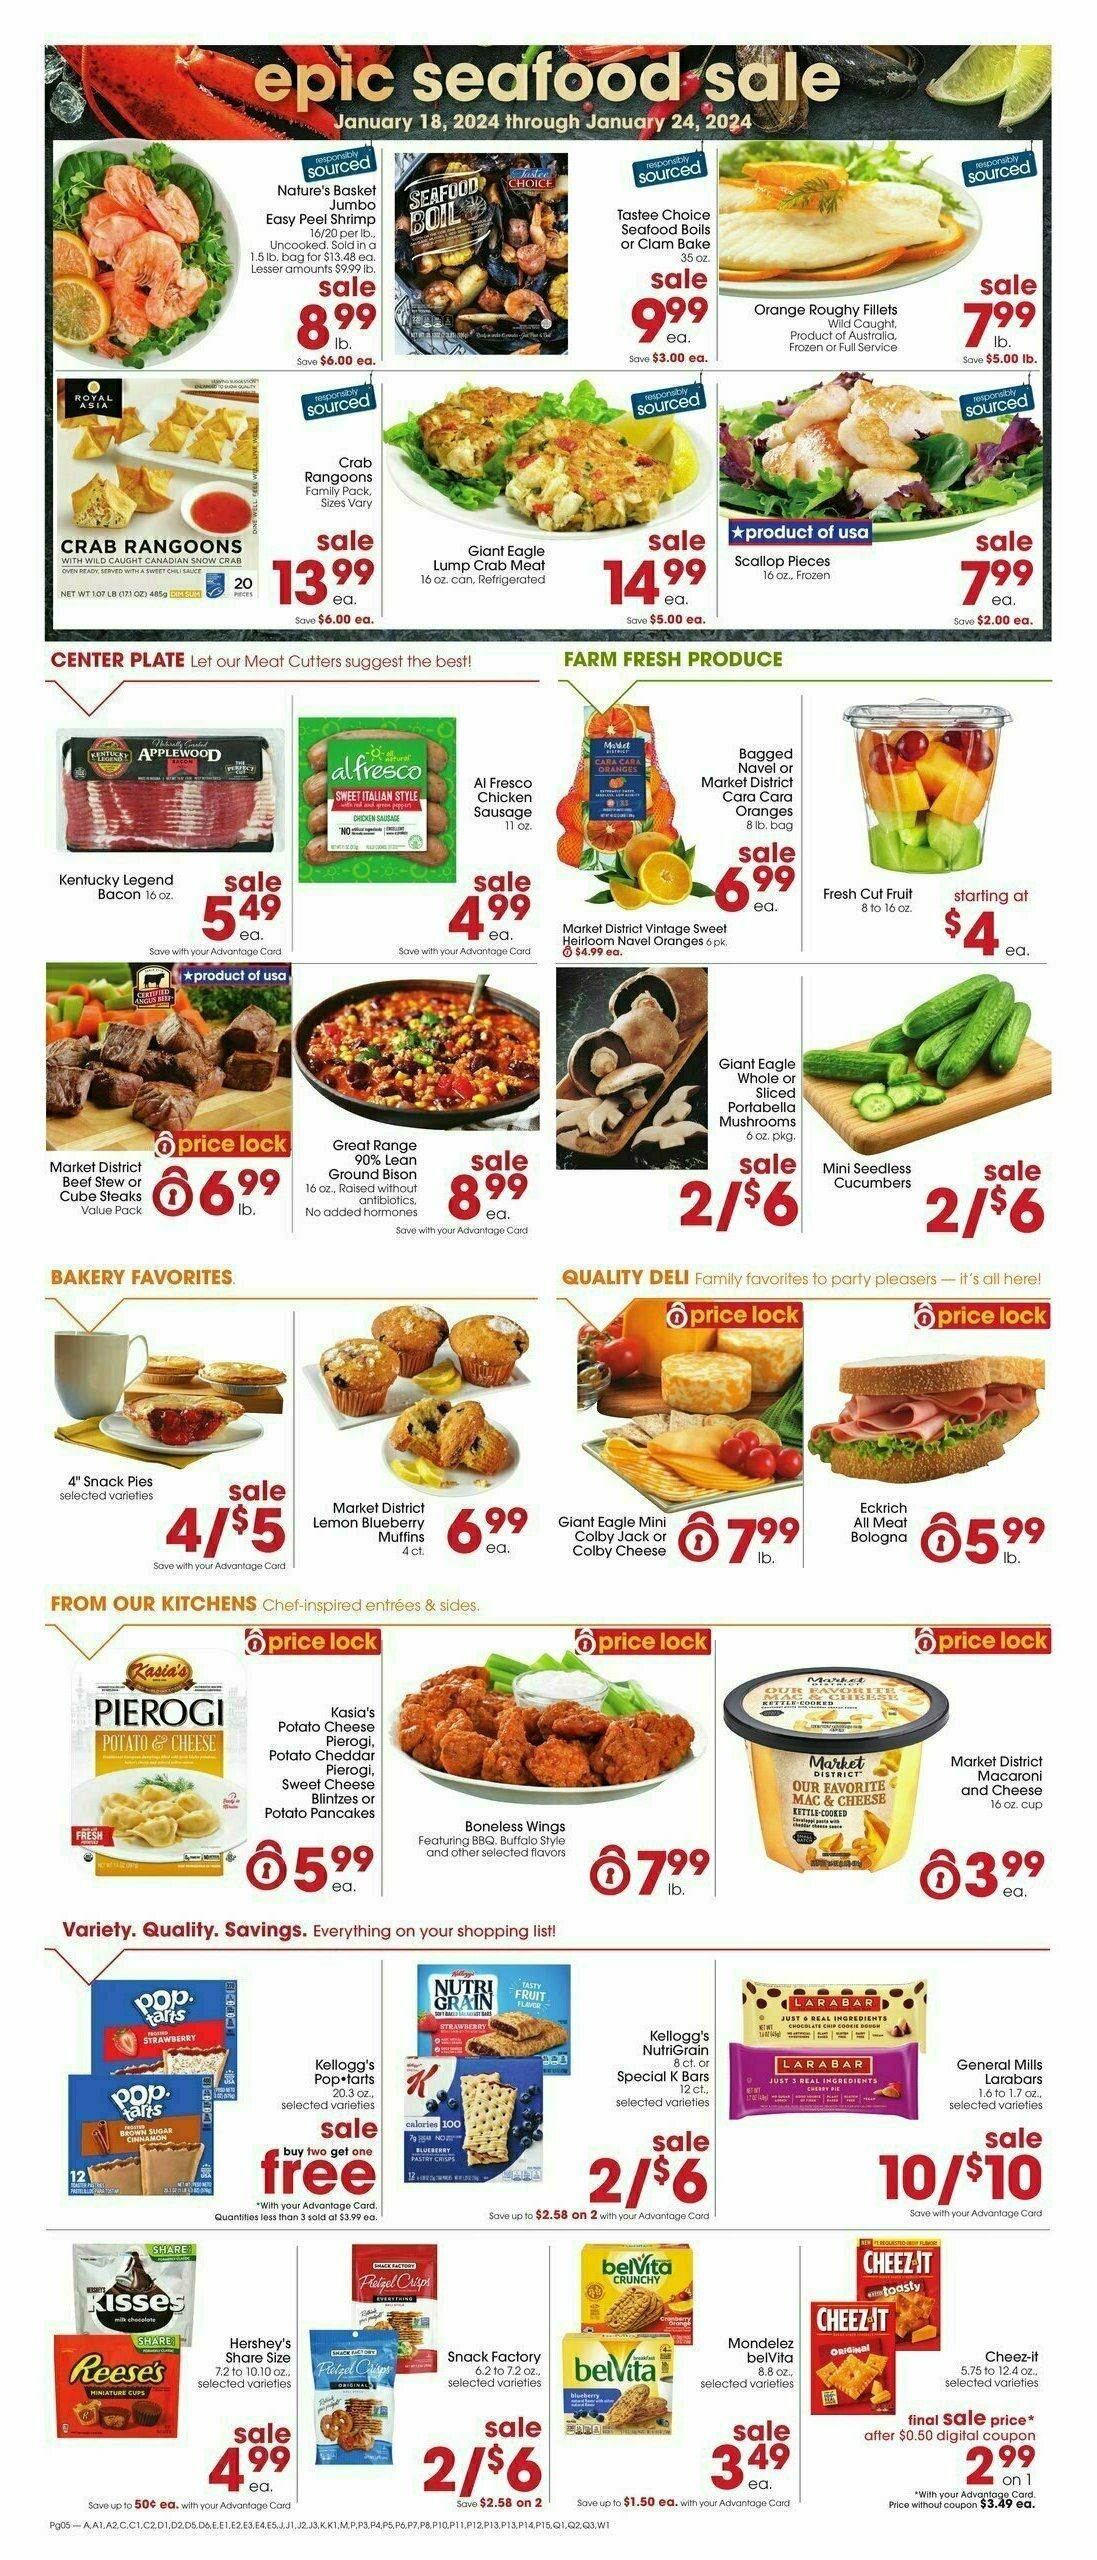 Giant Eagle Weekly Ad from January 18